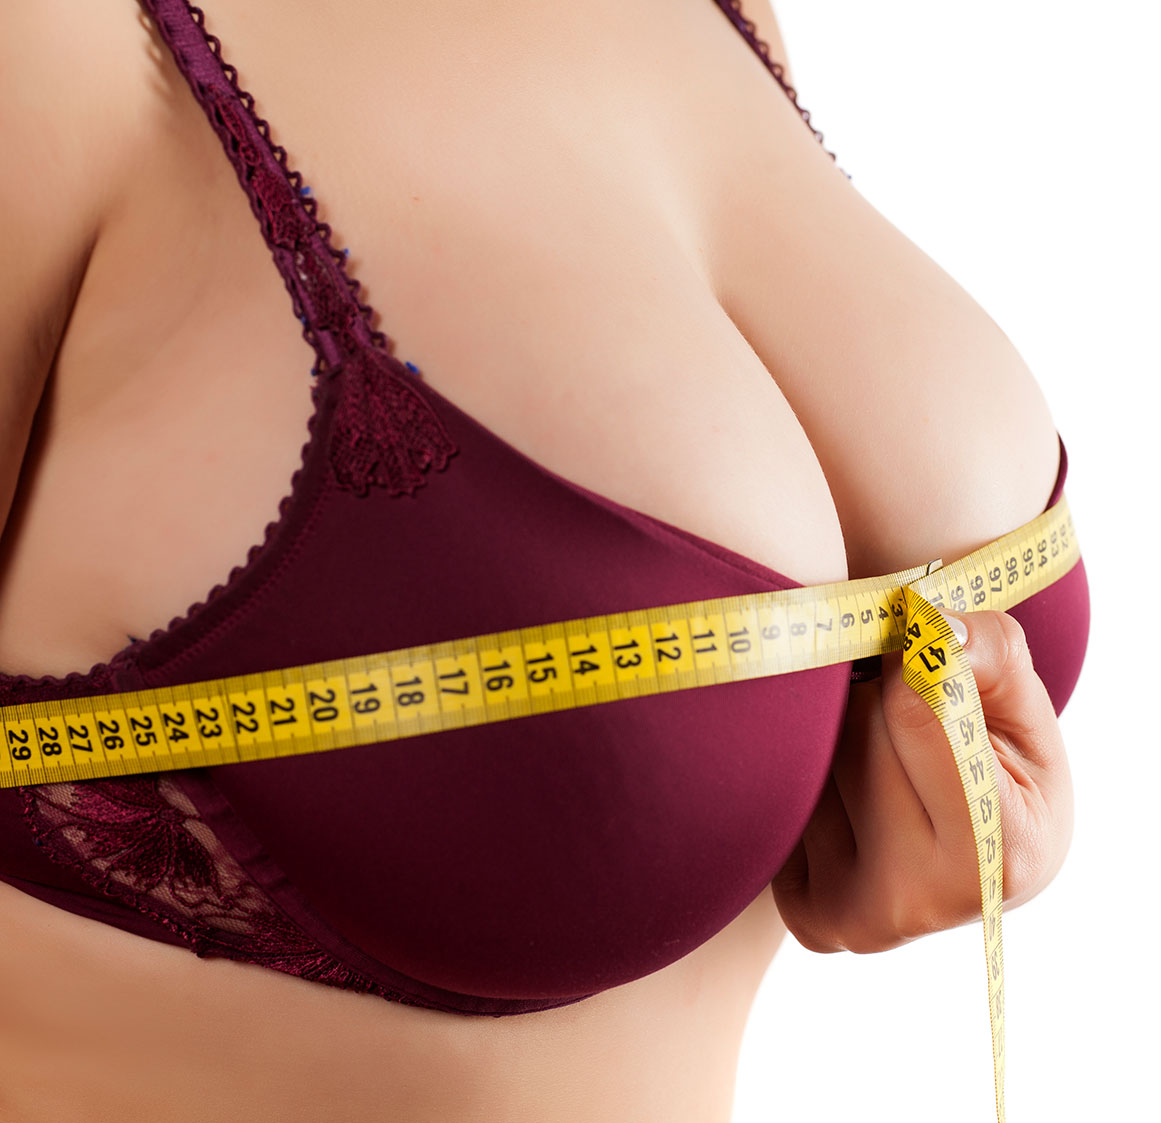 Breast Reduction Newcastle